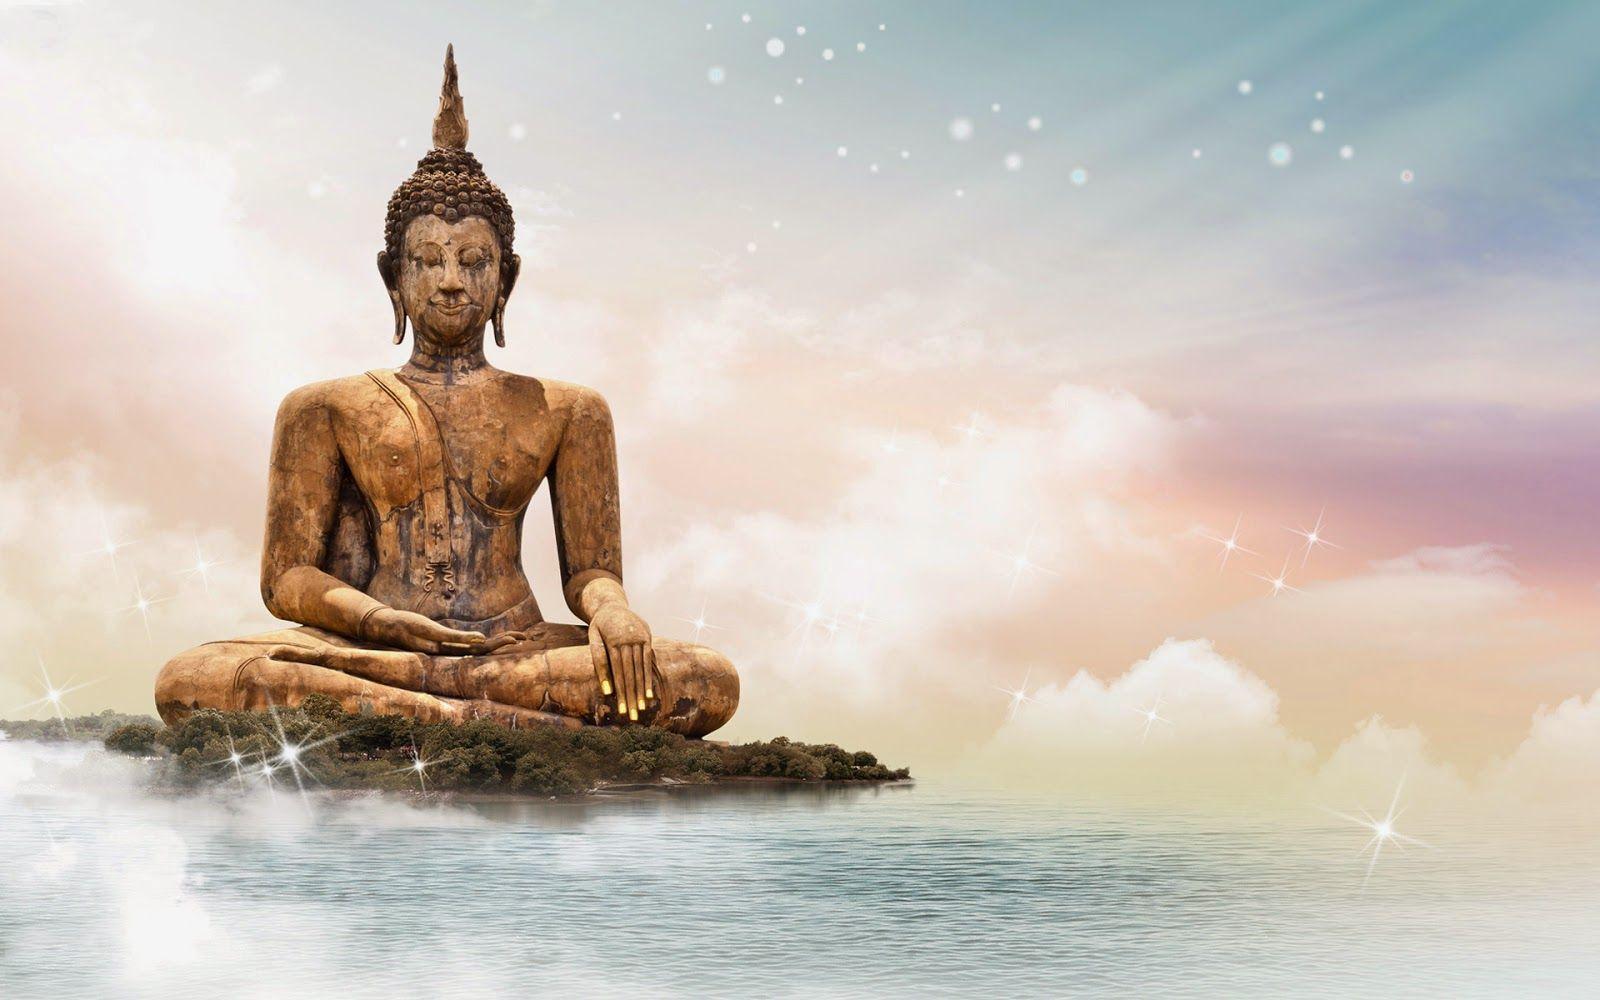 Lord Buddha face Art HD image and statue wallpaper